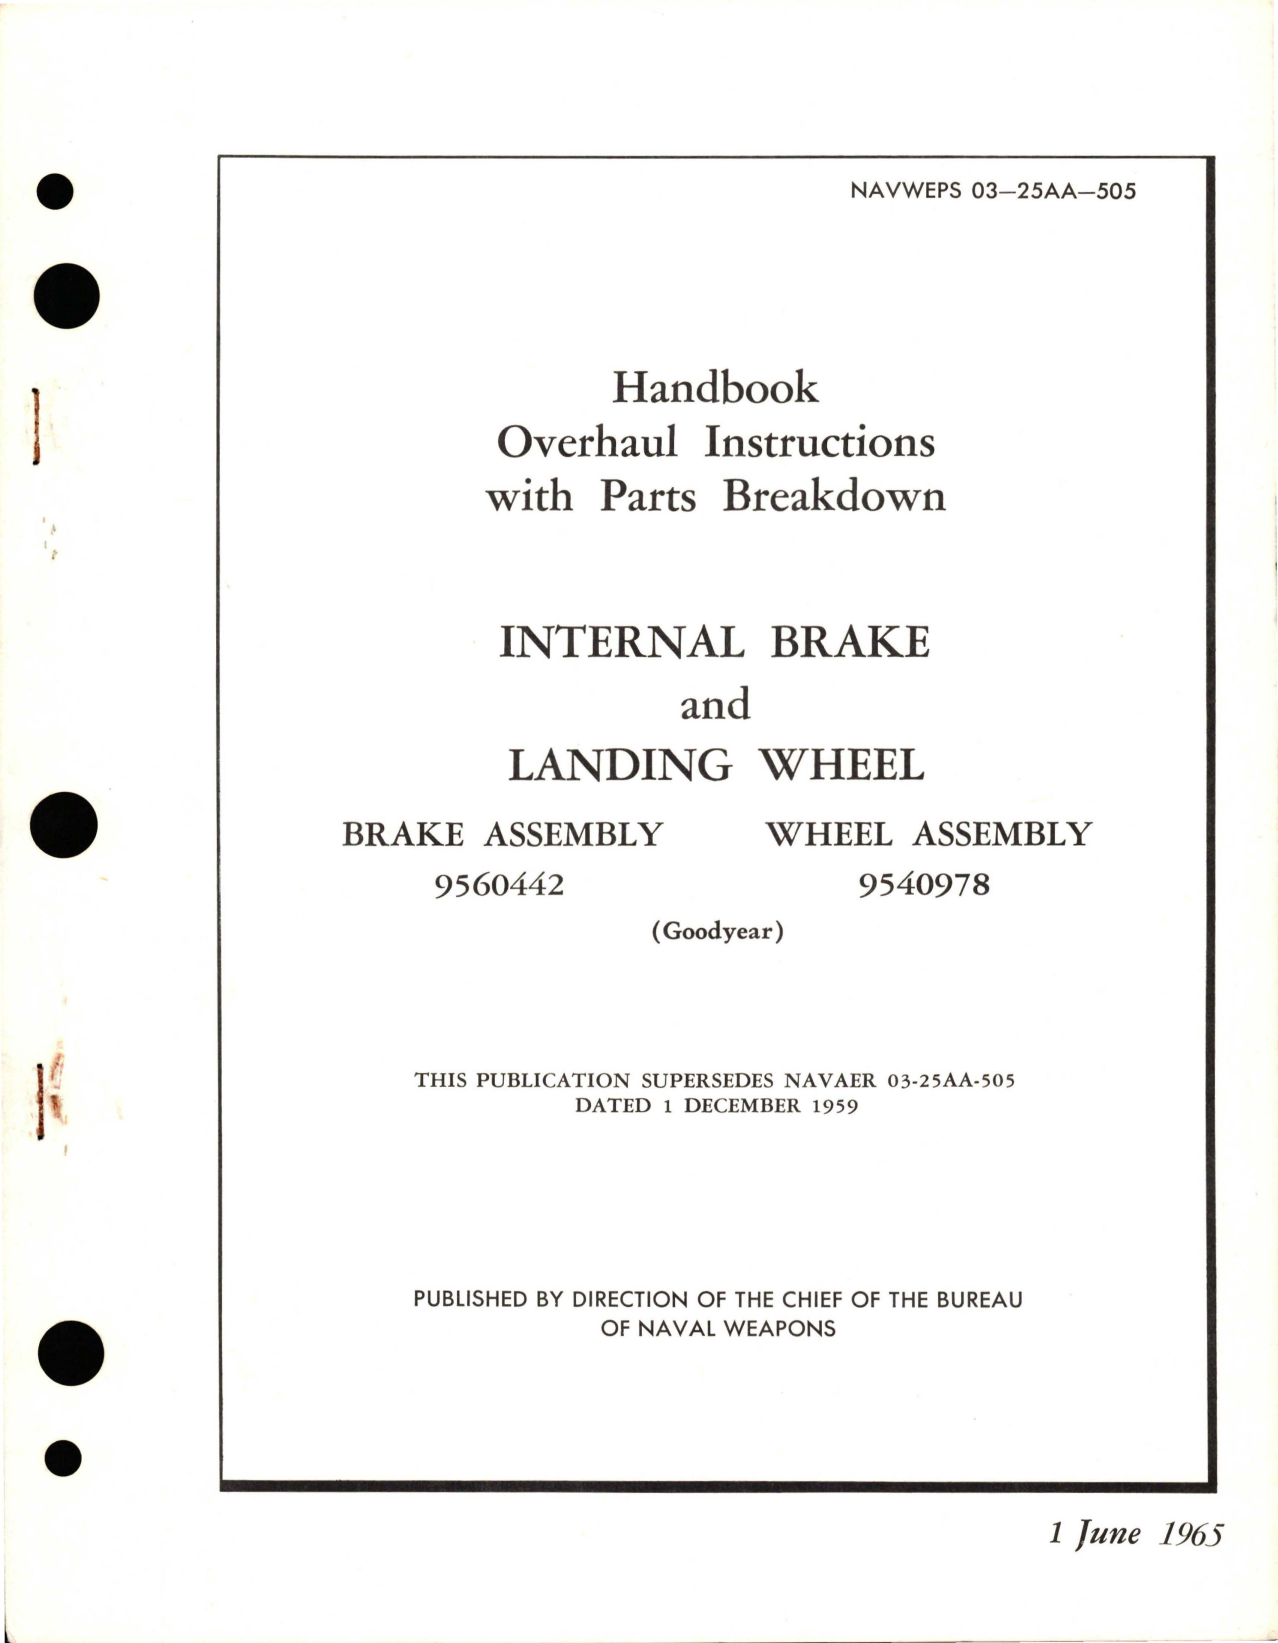 Sample page 1 from AirCorps Library document: Overhaul Instructions with Parts Breakdown for Internal Brake and Landing Gear Brake Assembly 9560442 and Wheel Assembly 9540978 